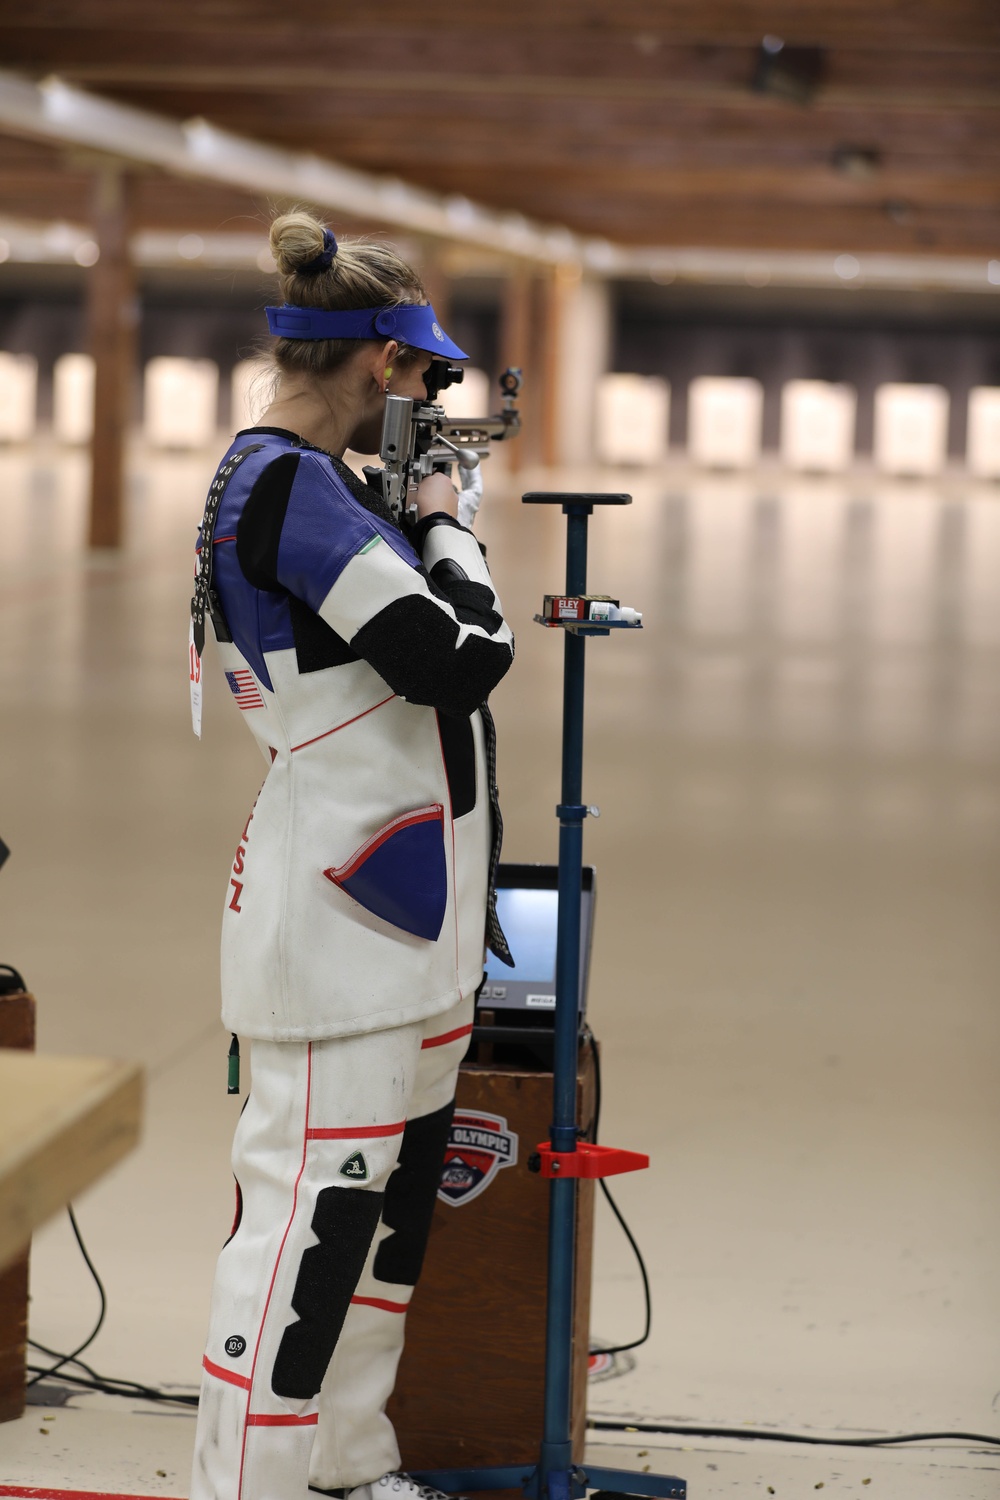 U.S. Army Soldiers to compete in ISSF Rifle World Cup